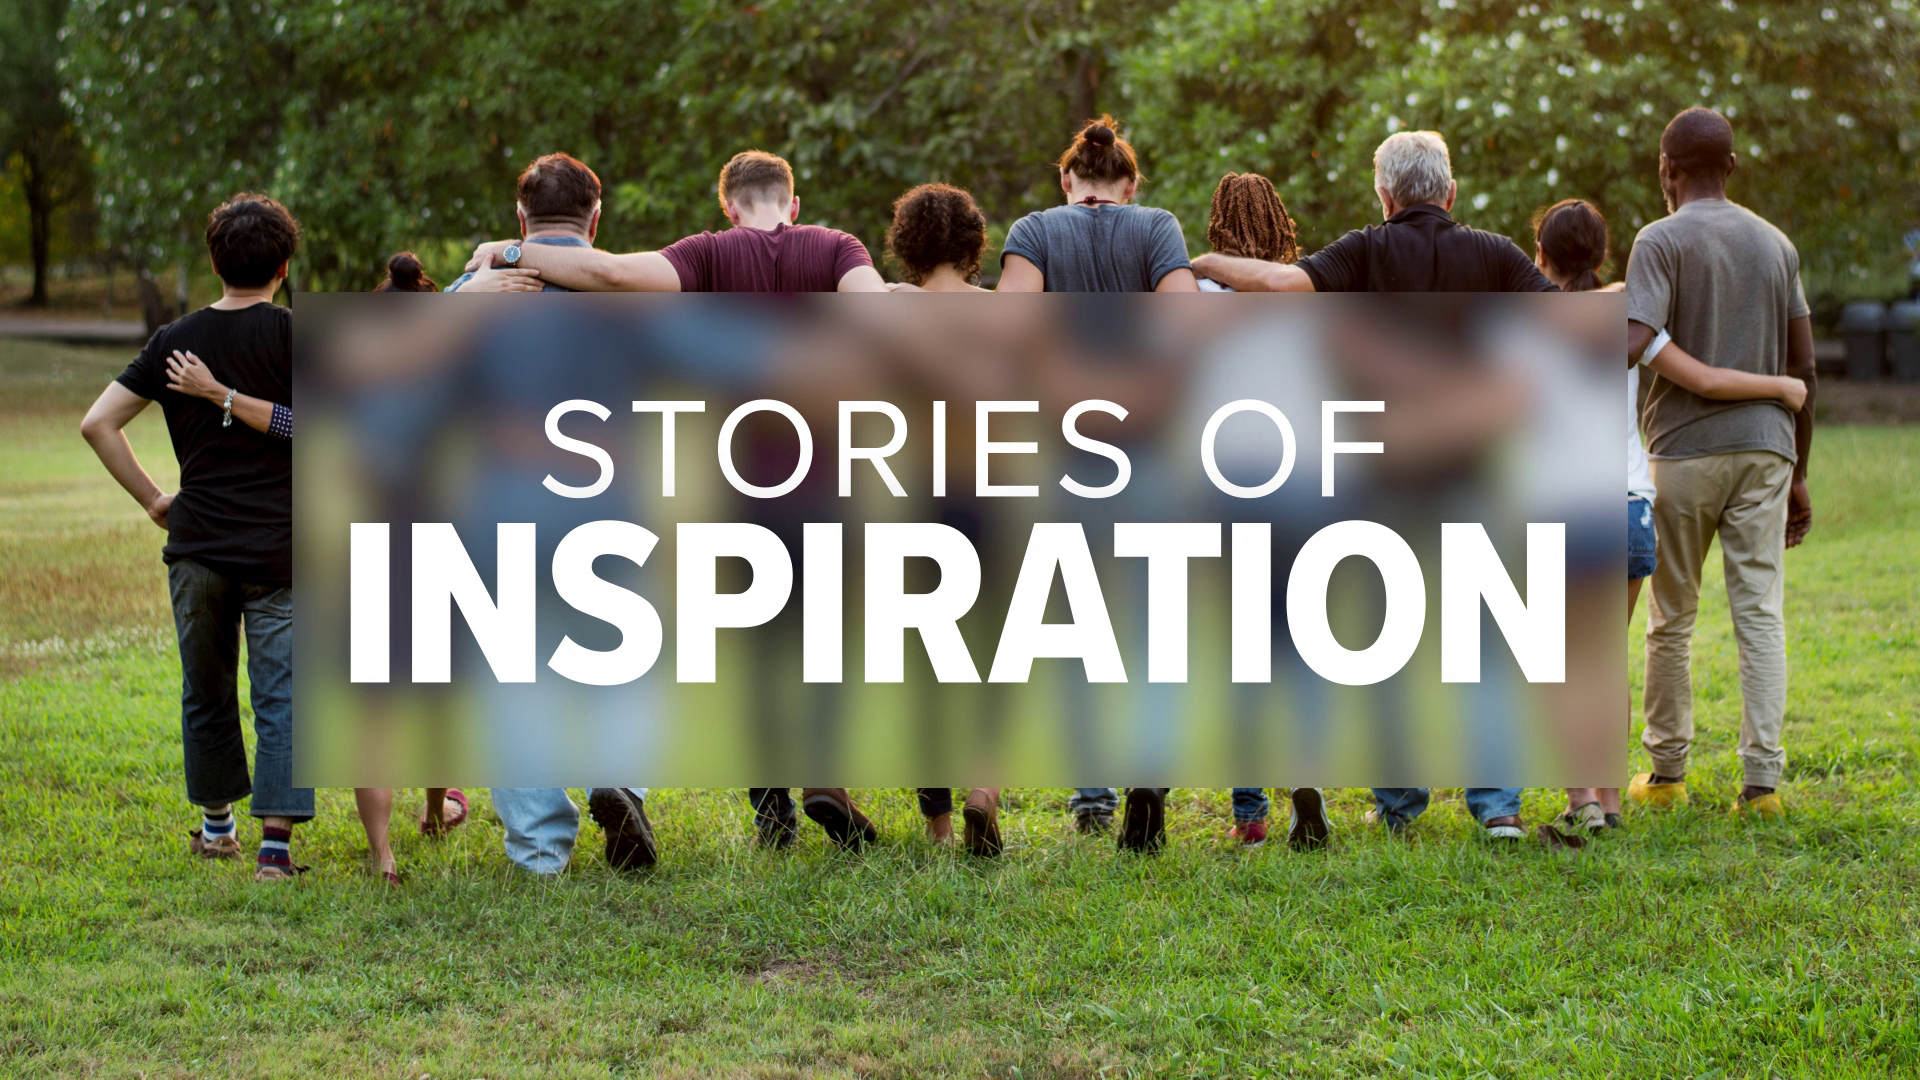 Some inspirational stories that we love from this year